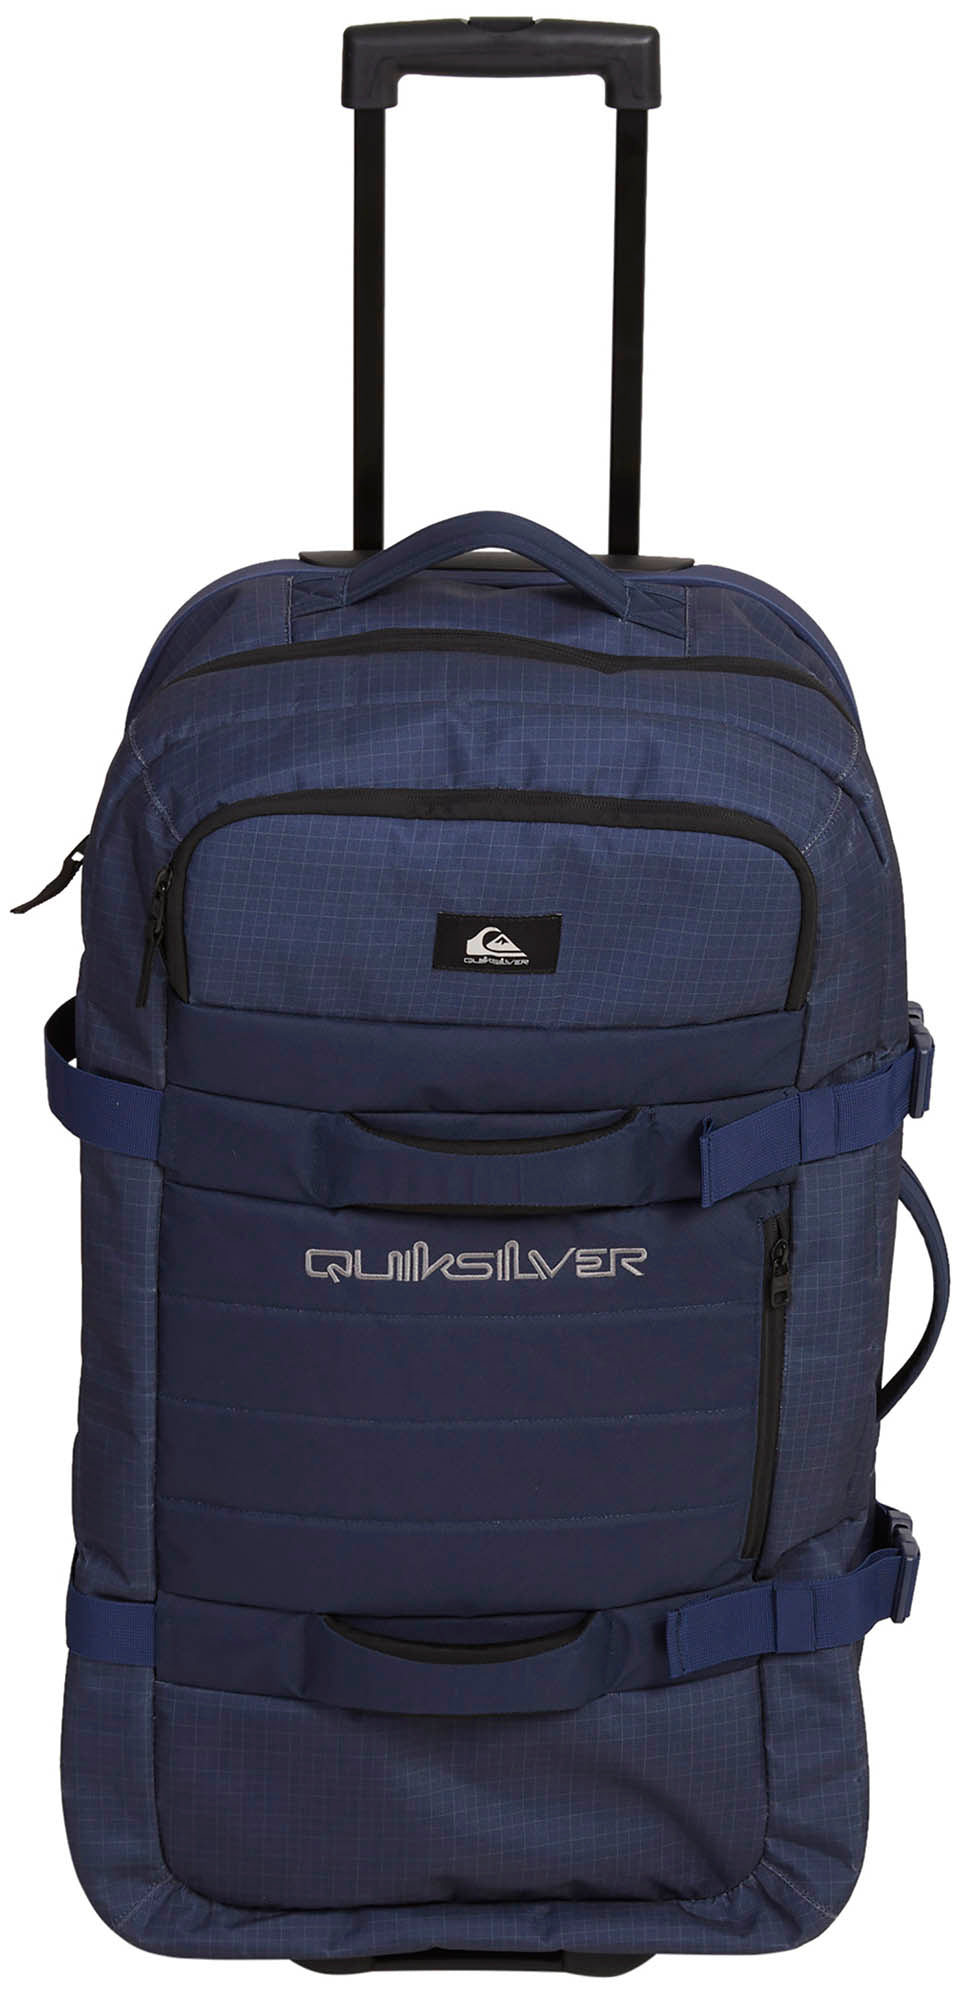 Quiksilver - – Reach Academy Suitcase thebackpacker New 100L Naval